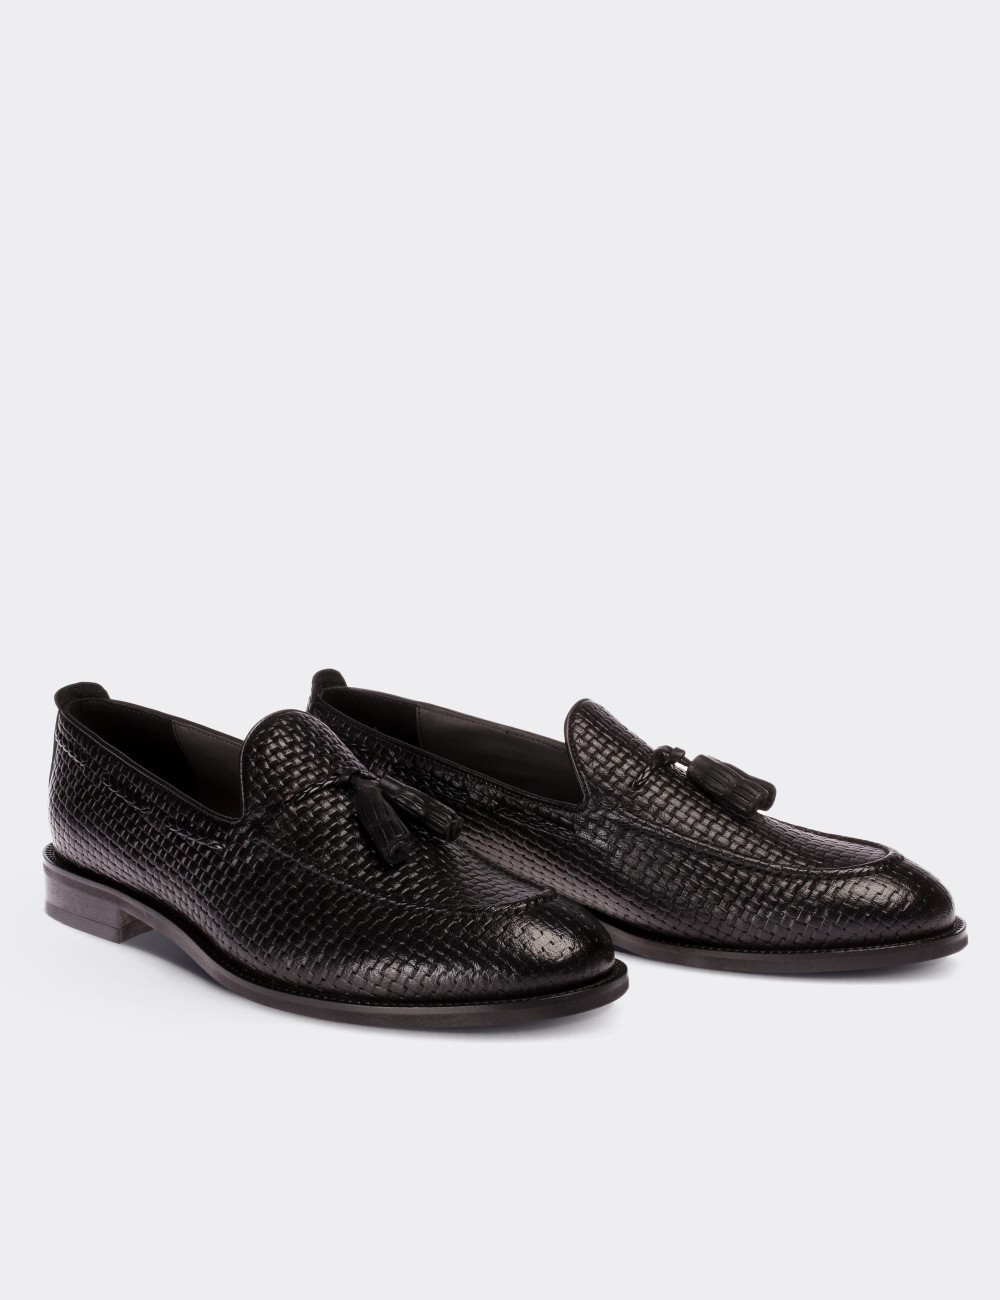 Black  Leather Loafers - 01642MSYHM02